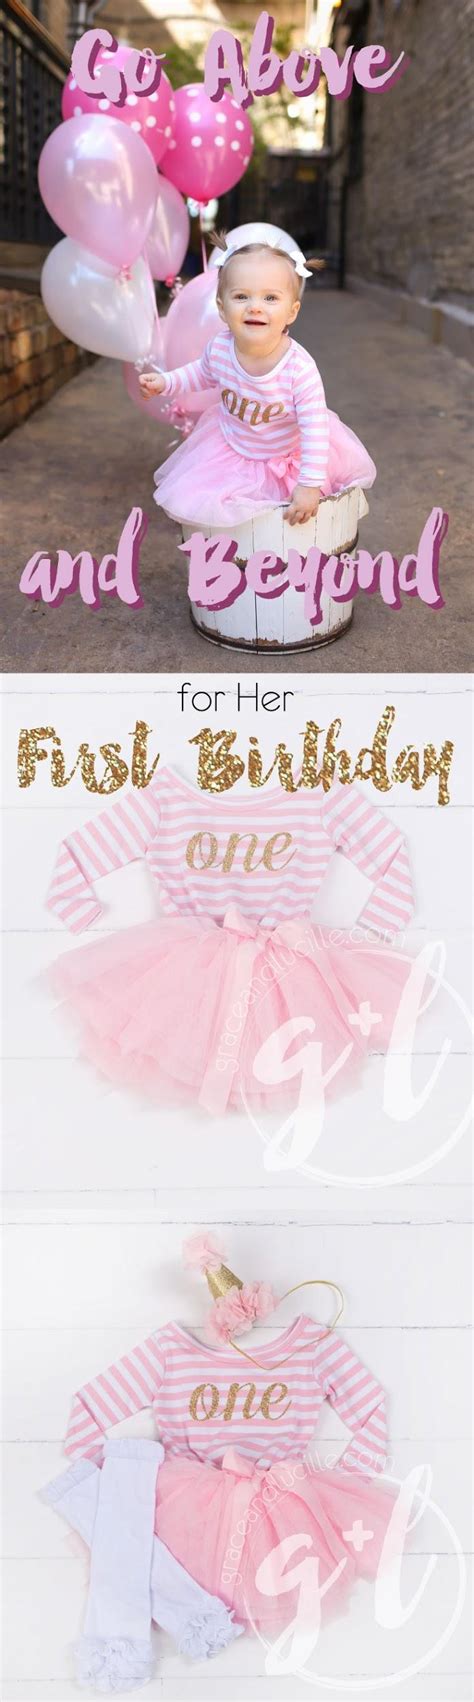 Big Balloons For A Big Birthday Make Her First One Special With A Tutu Dress By Grace And